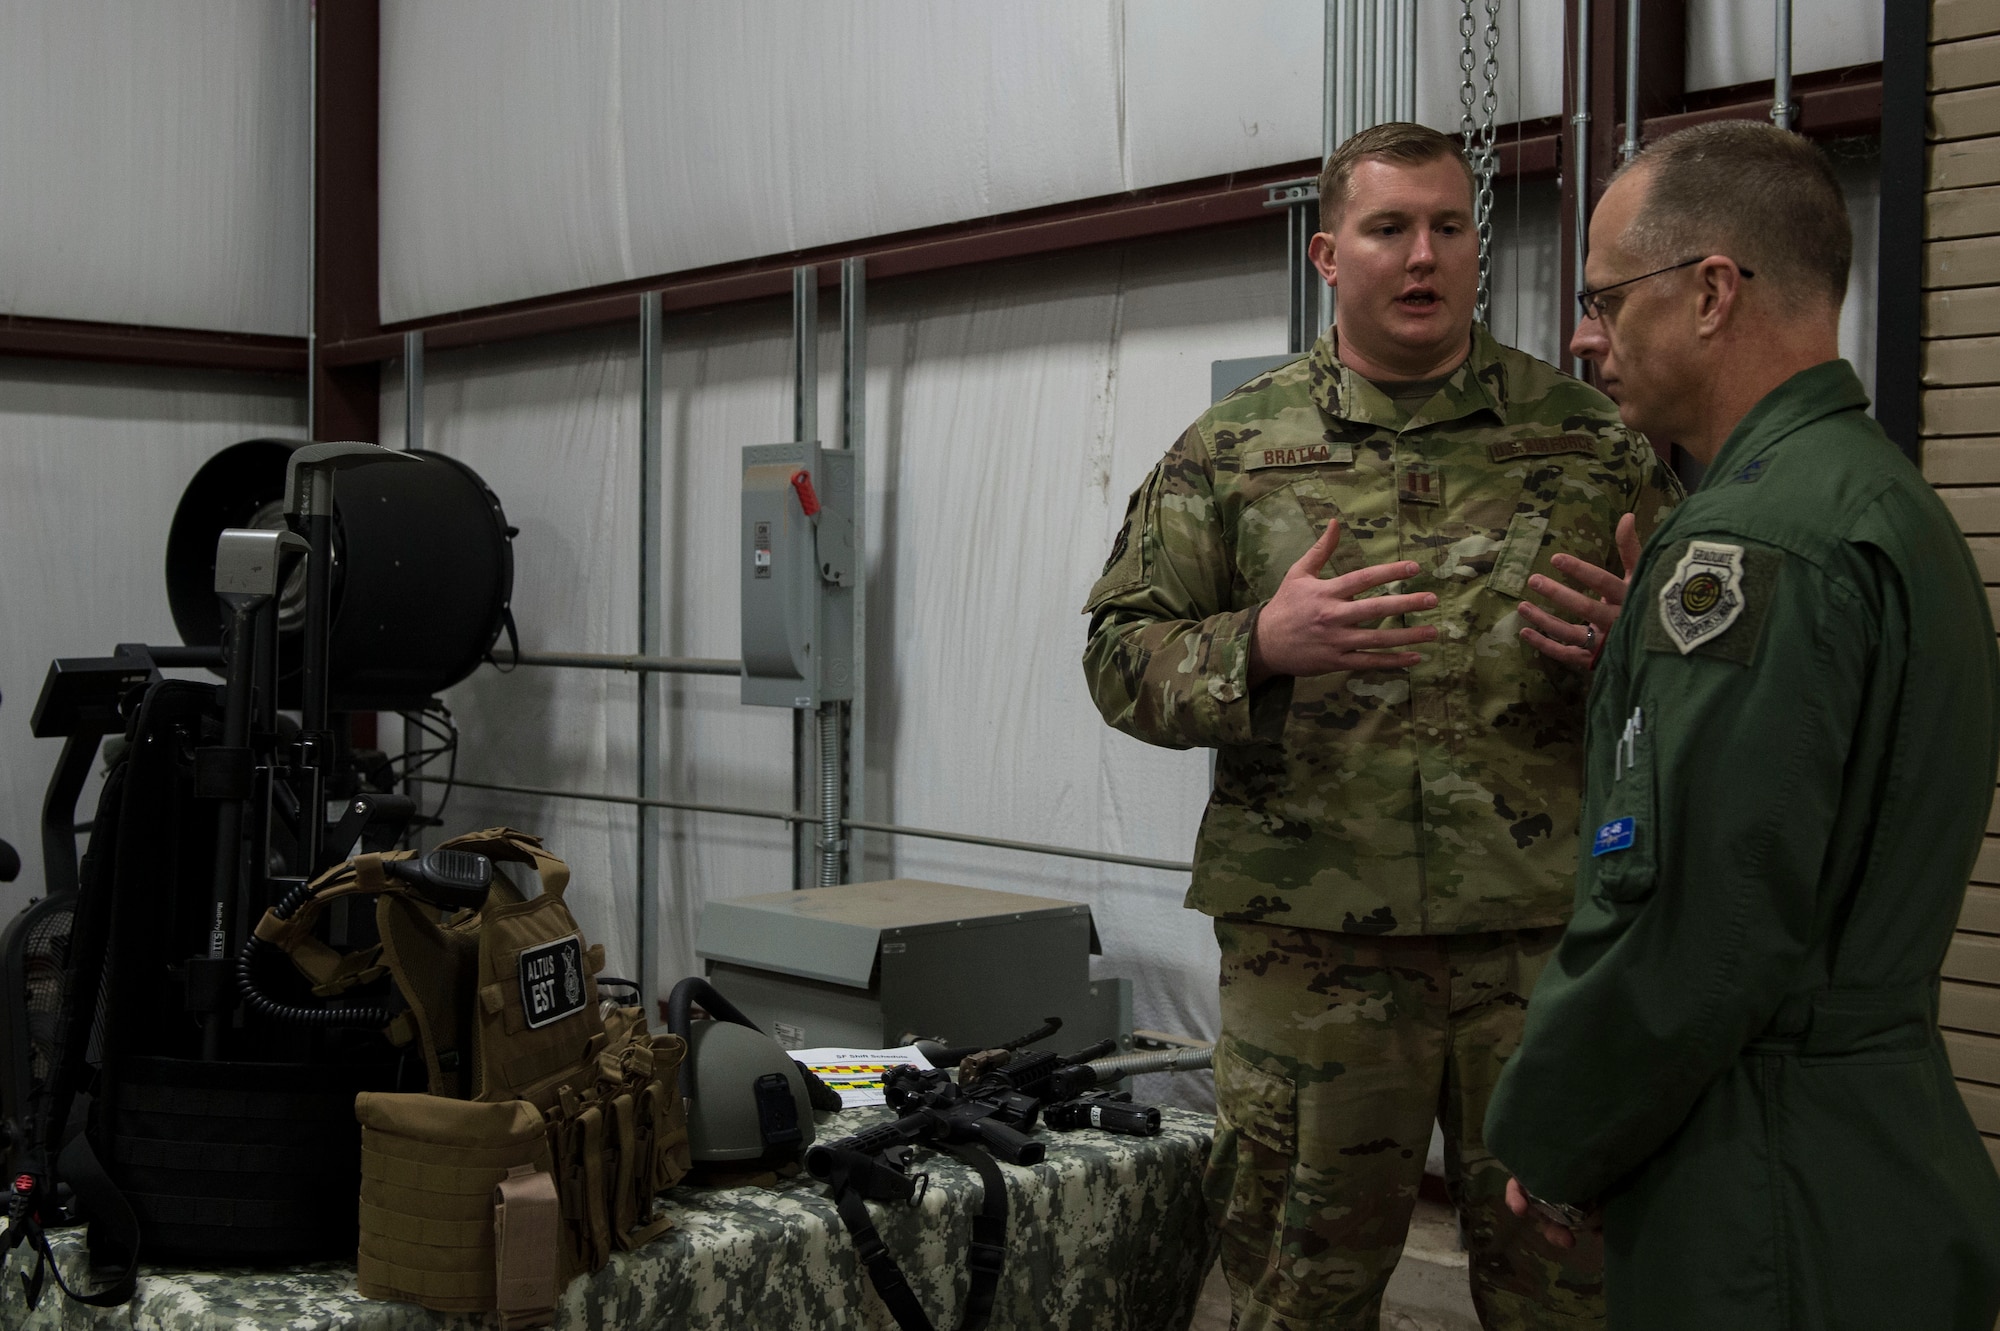 U.S. Air Force Capt. Nathan Bratka, operations officer assigned to the 97th Security Forces Squadron, showcases the equipment used by the emergency service team for the 97th SFS to Maj. Gen. Mark Weatherington, Air Education and Training Command deputy commander, Nov. 8, 2018, at Altus Air Force Base, Okla. Several squadrons across the 97th Air Mobility Wing showcased their capabilities to Weatherington to highlight their innovations and progress with training. (U.S. Air Force photo by Senior Airman Cody Dowell)